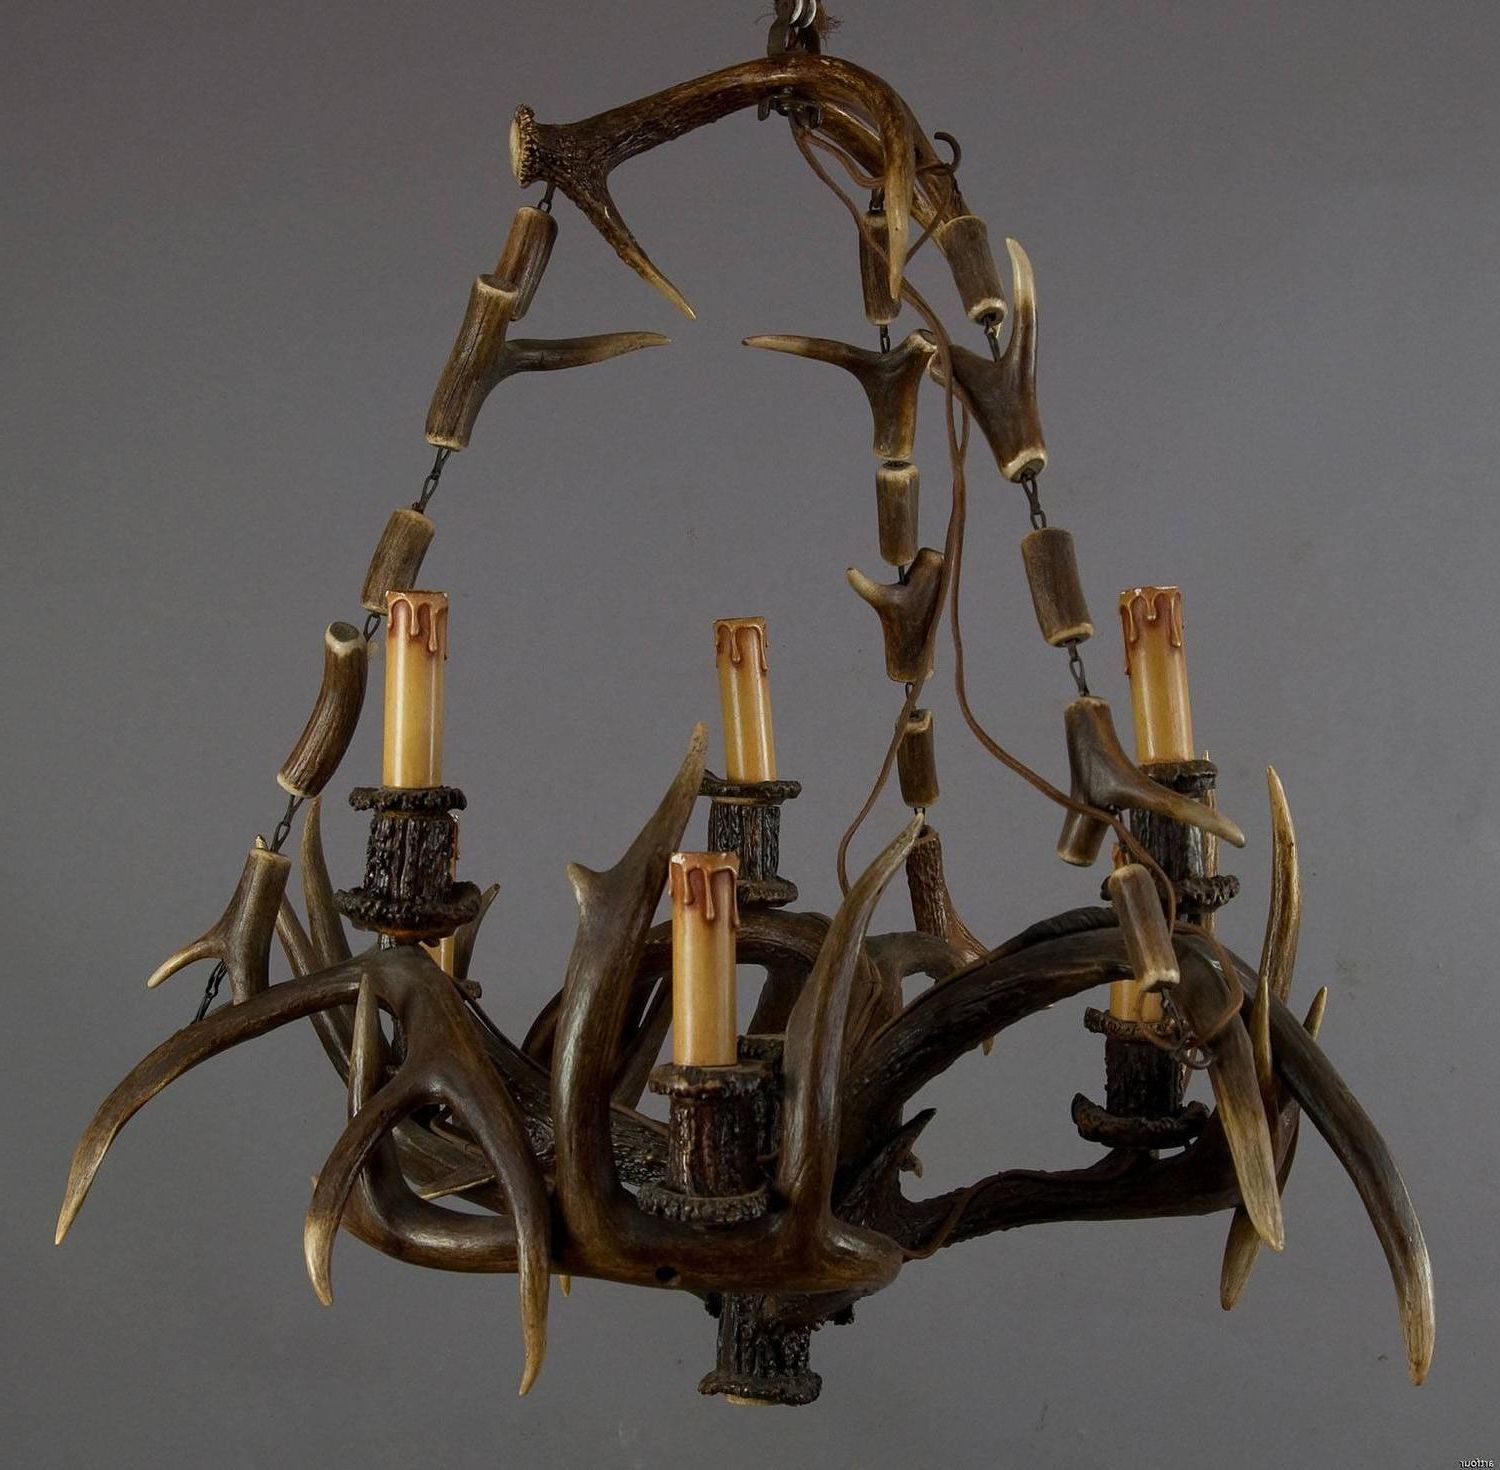 Latest Rustic Black Chandeliers Intended For Rustic Black Forest Antler Chandelier For Sale At 1stdibs (View 16 of 20)